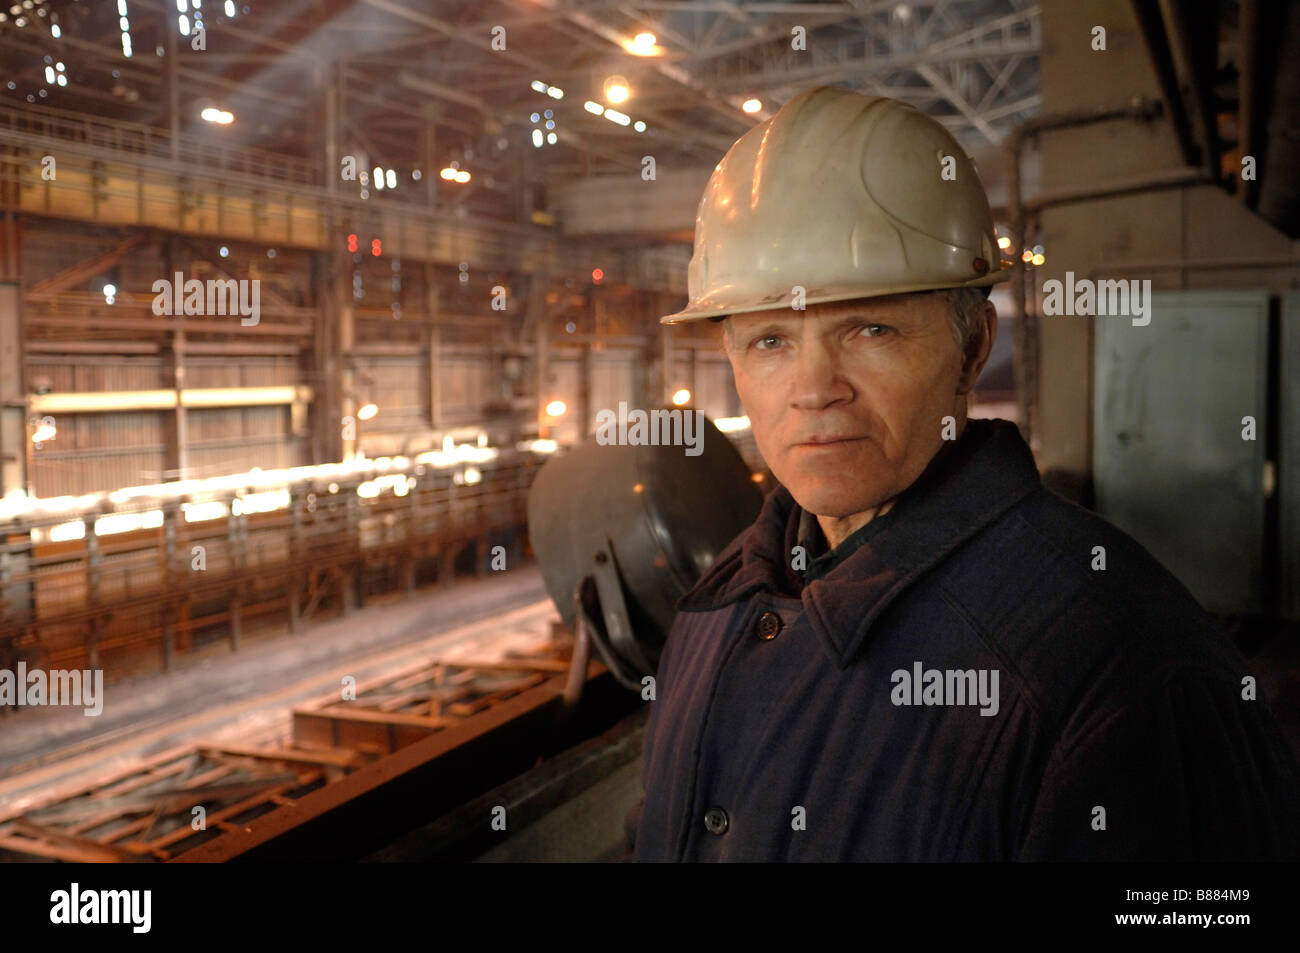 Workers at Donetsk steel mill in Eastern Ukraine The steel plant is run by ISTIL group Stock Photo